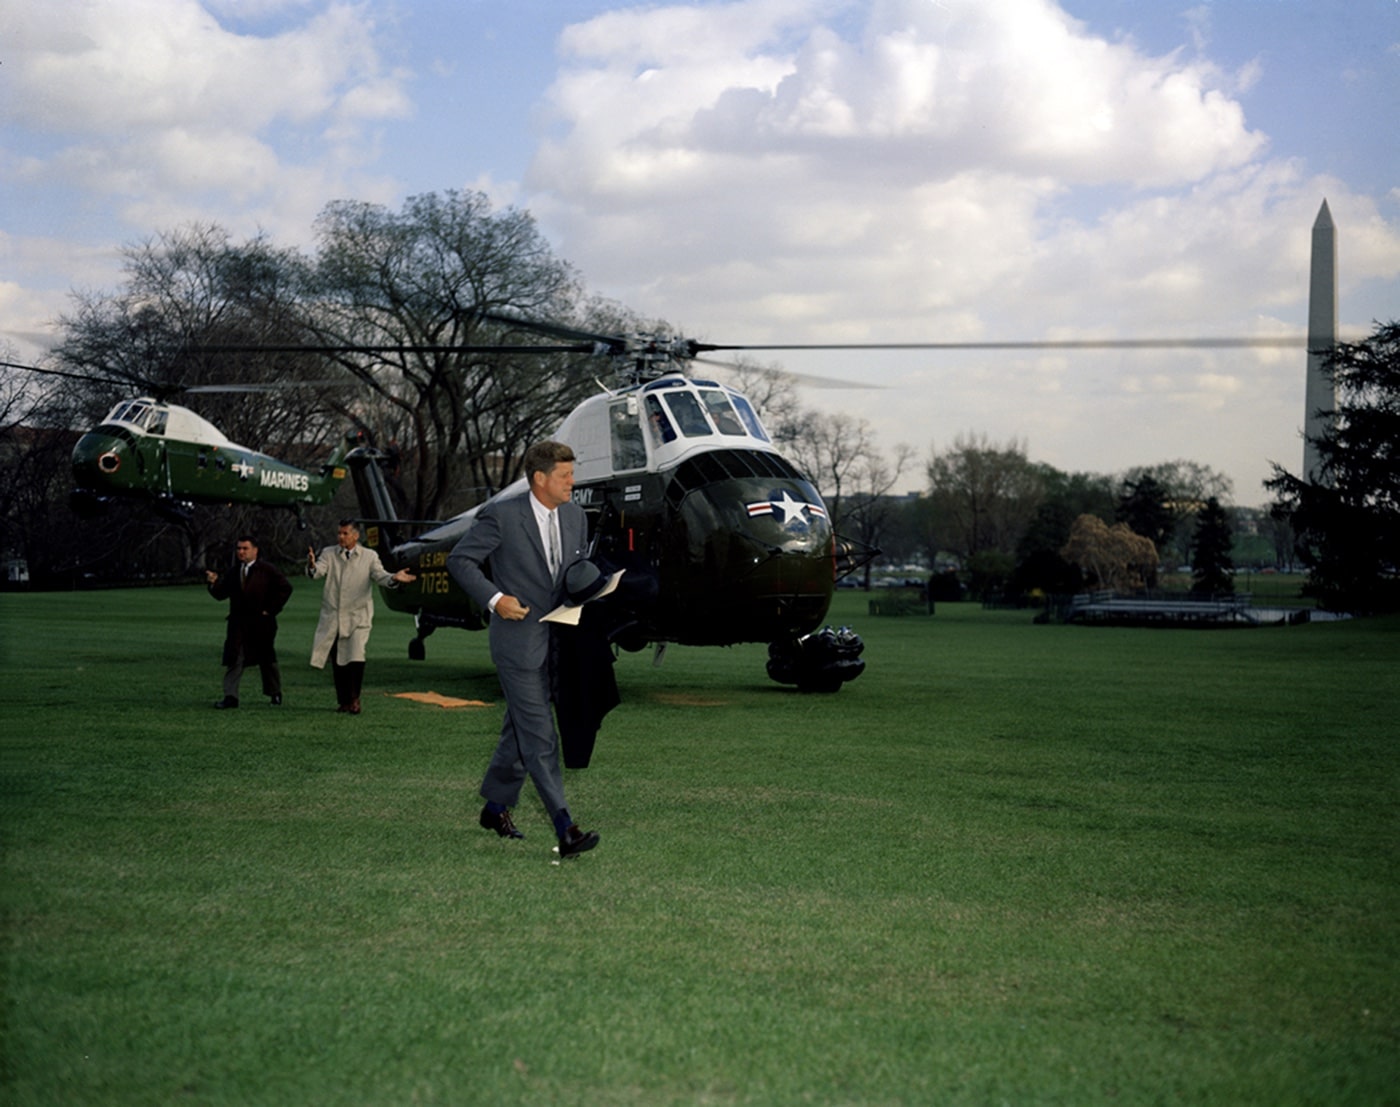 In this photo, President John Kennedy walks across the White House lawn after taking helicopter from Andrews Air Force Base. The VH-34D (later designated the HUS-1Z) was a version of the H-34 designed for transporting the United States President and other dignitaries like the First Family, Secretary of Defense, Secretary of State and others. 